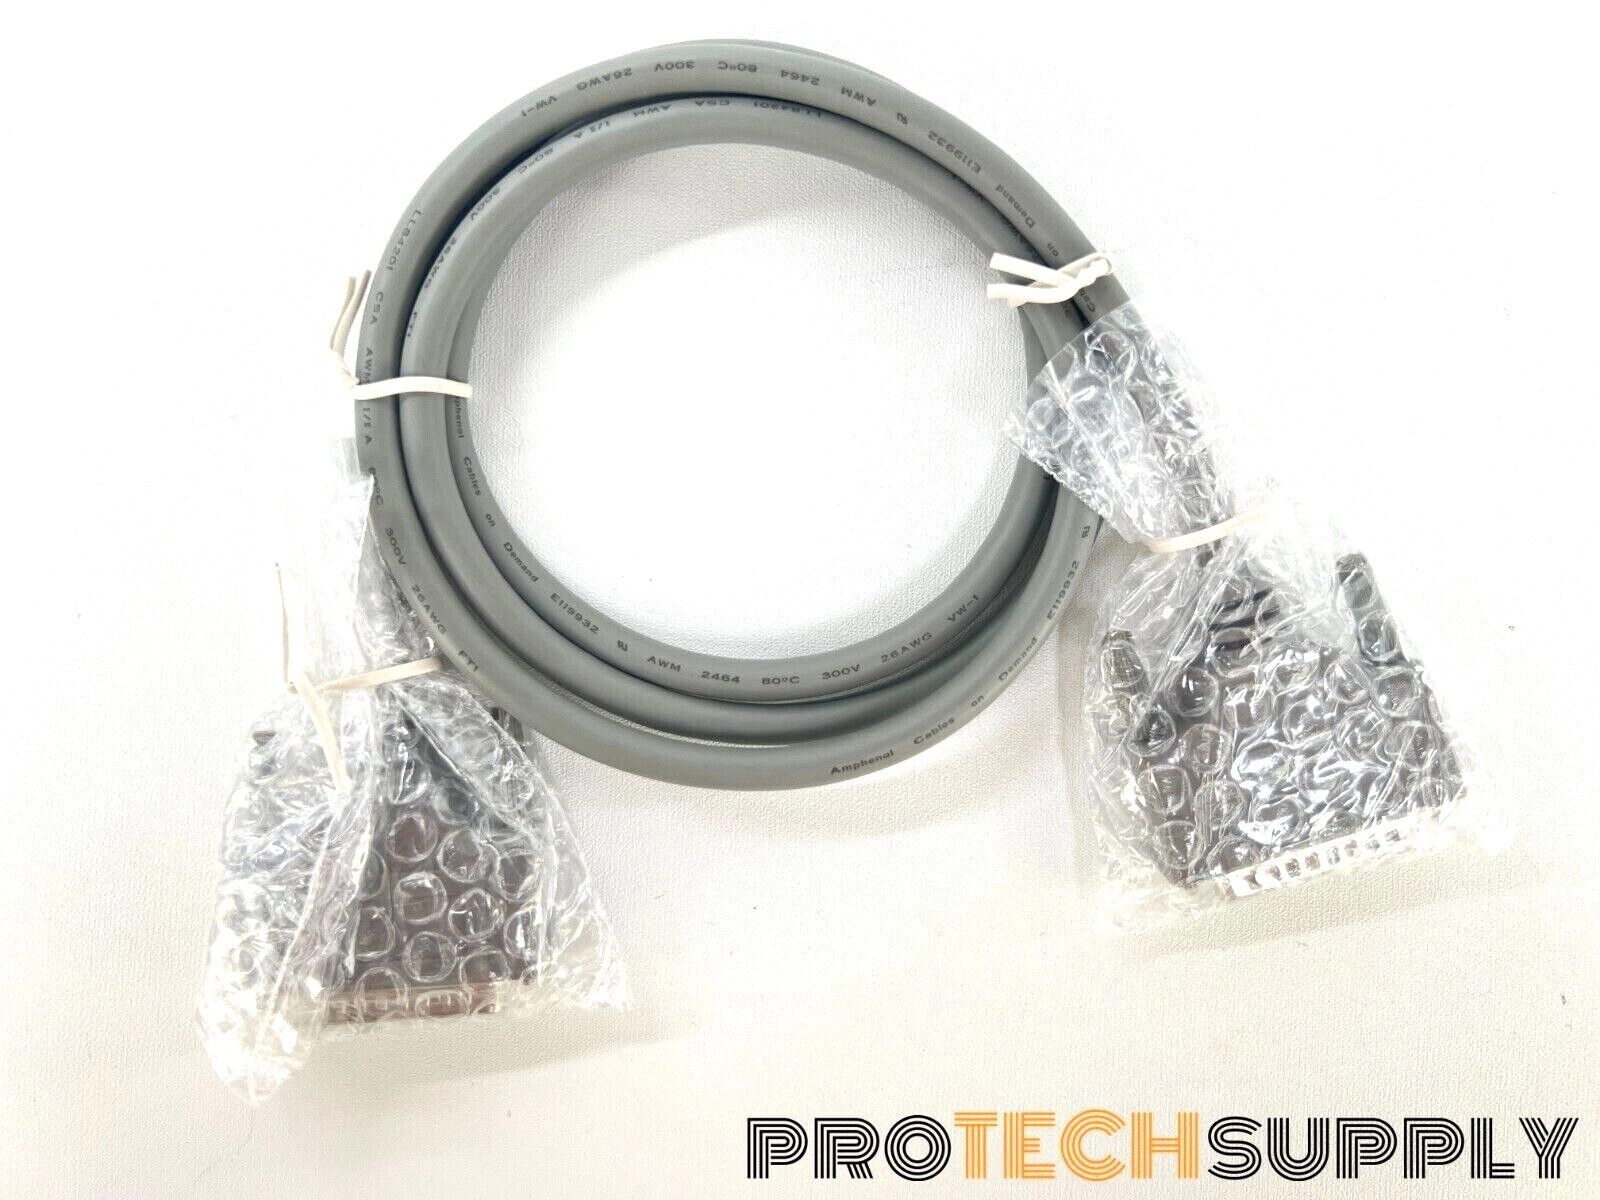 NEW Amphenol Cables on Demand D-Sub Cable 5Ft CS-D